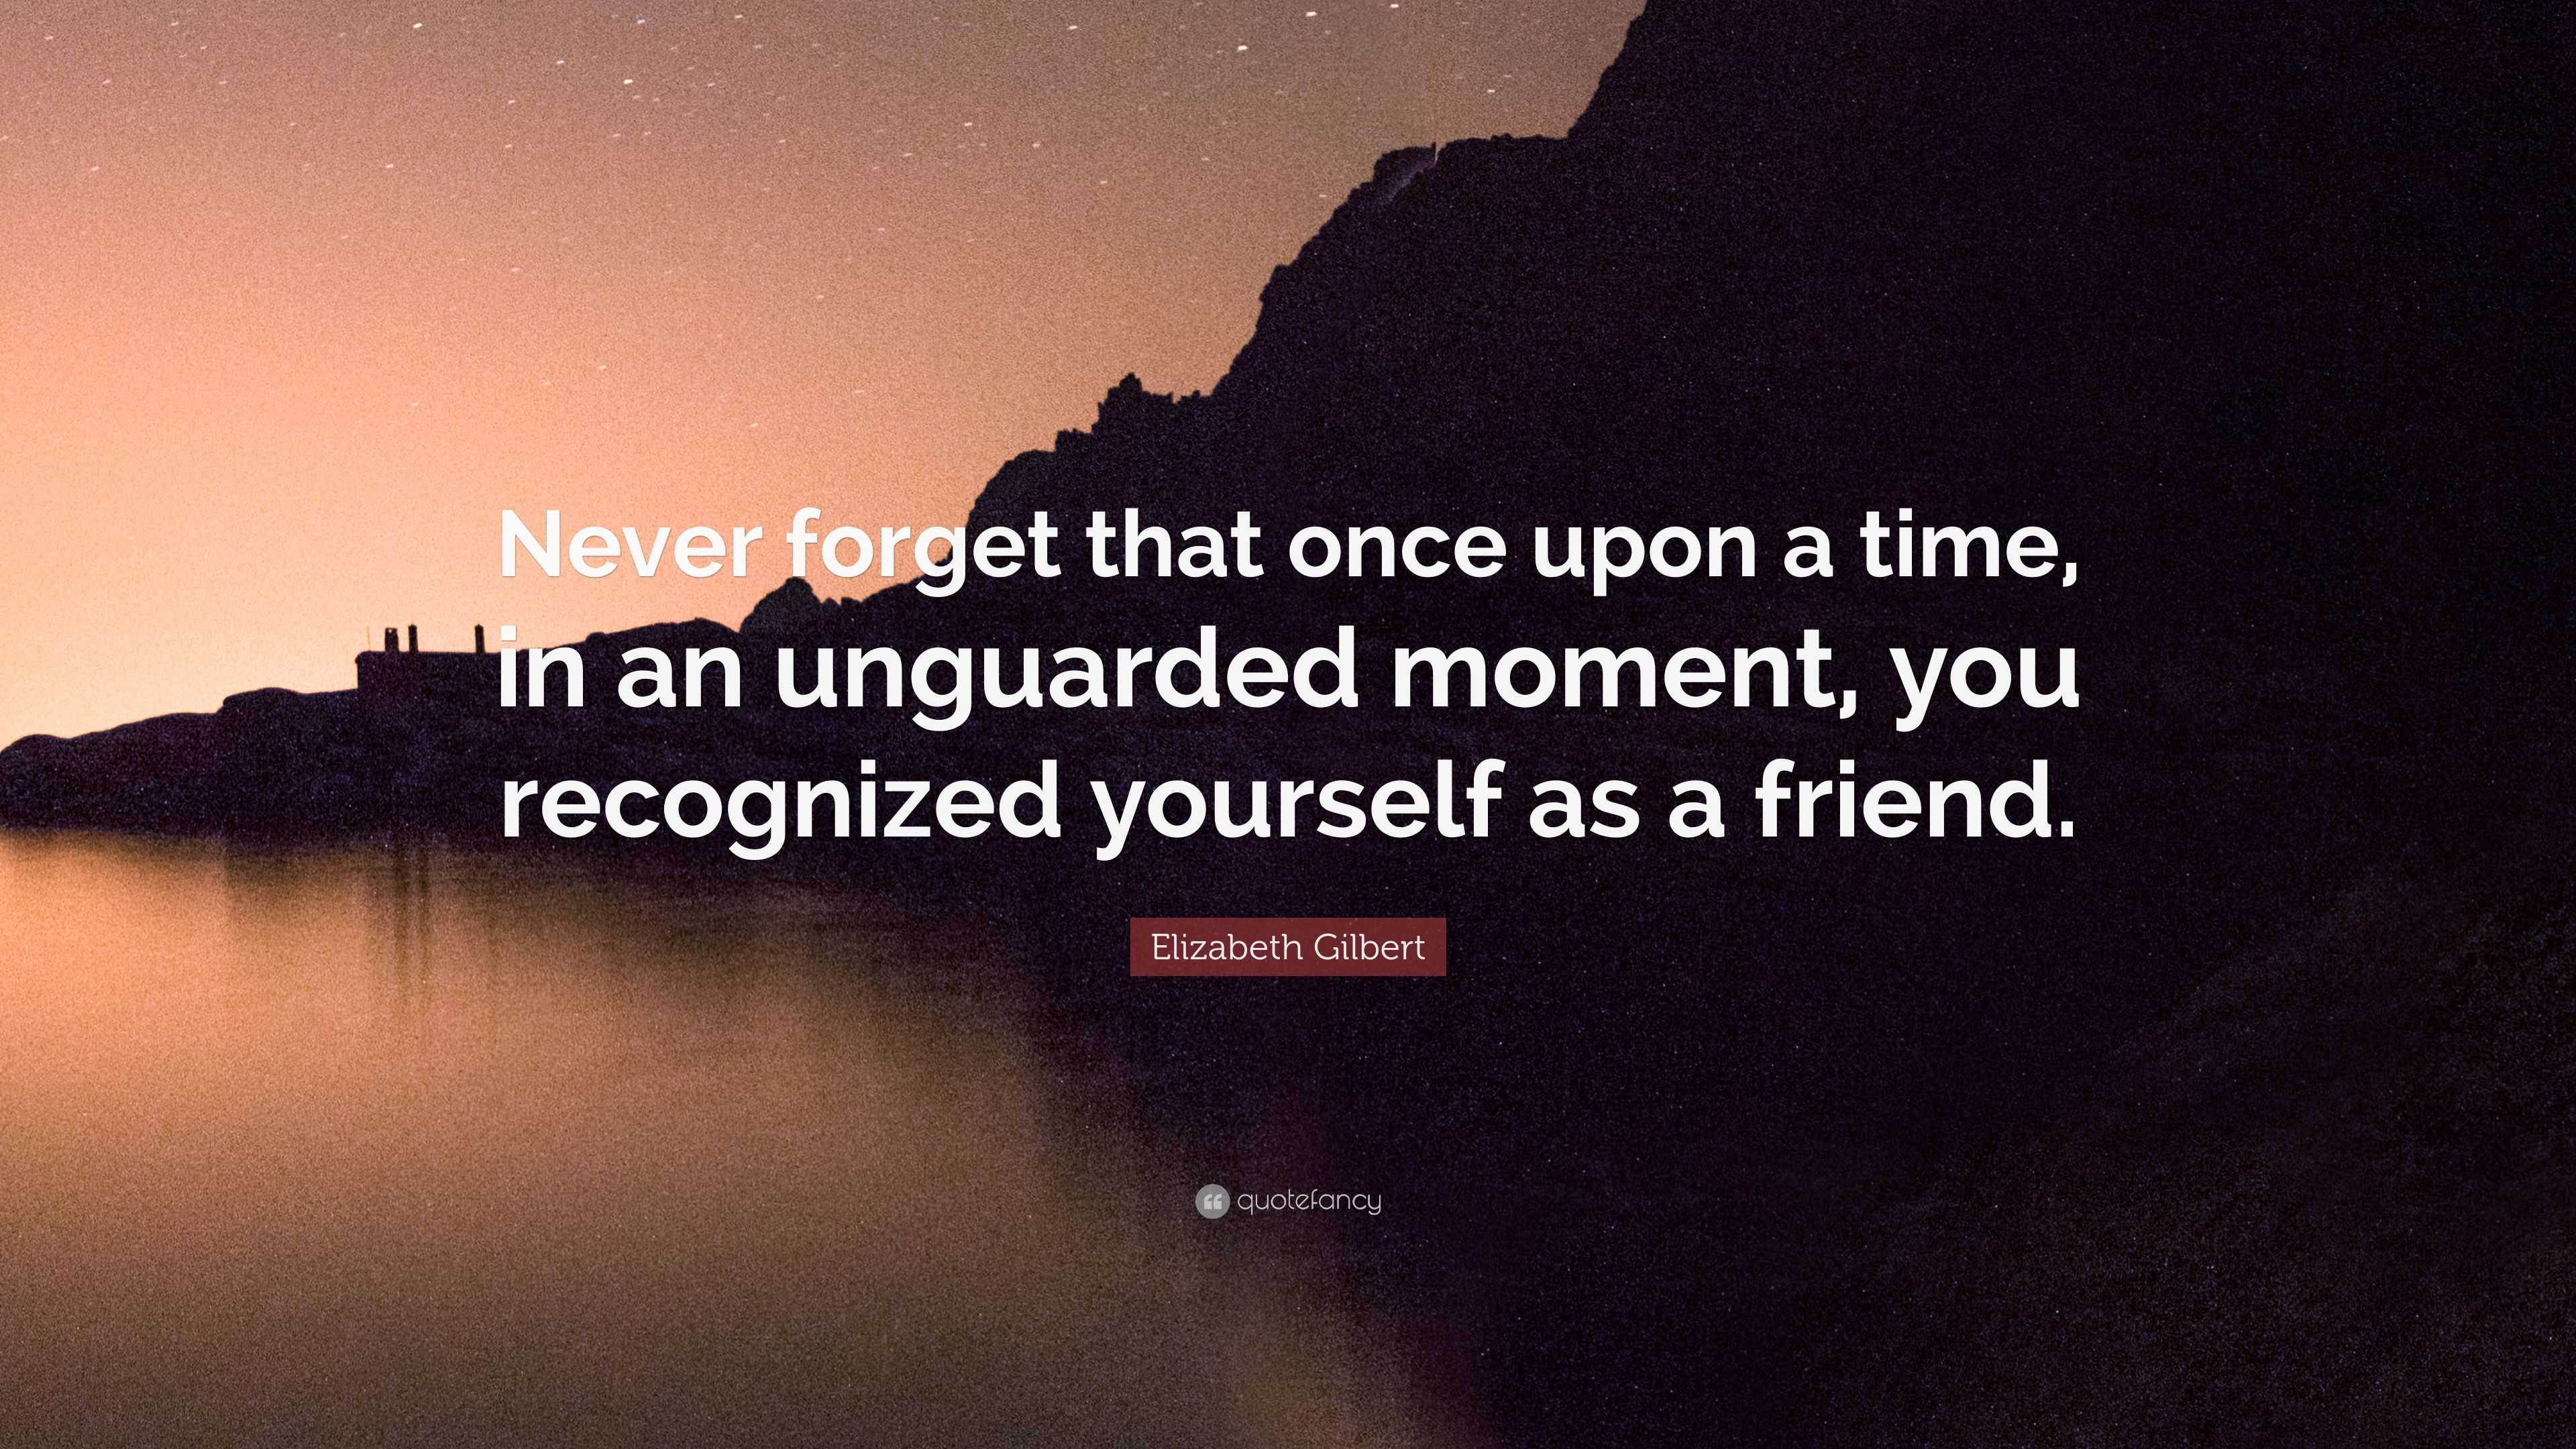 Elizabeth Gilbert Quote “Never for that once upon a time in an unguarded